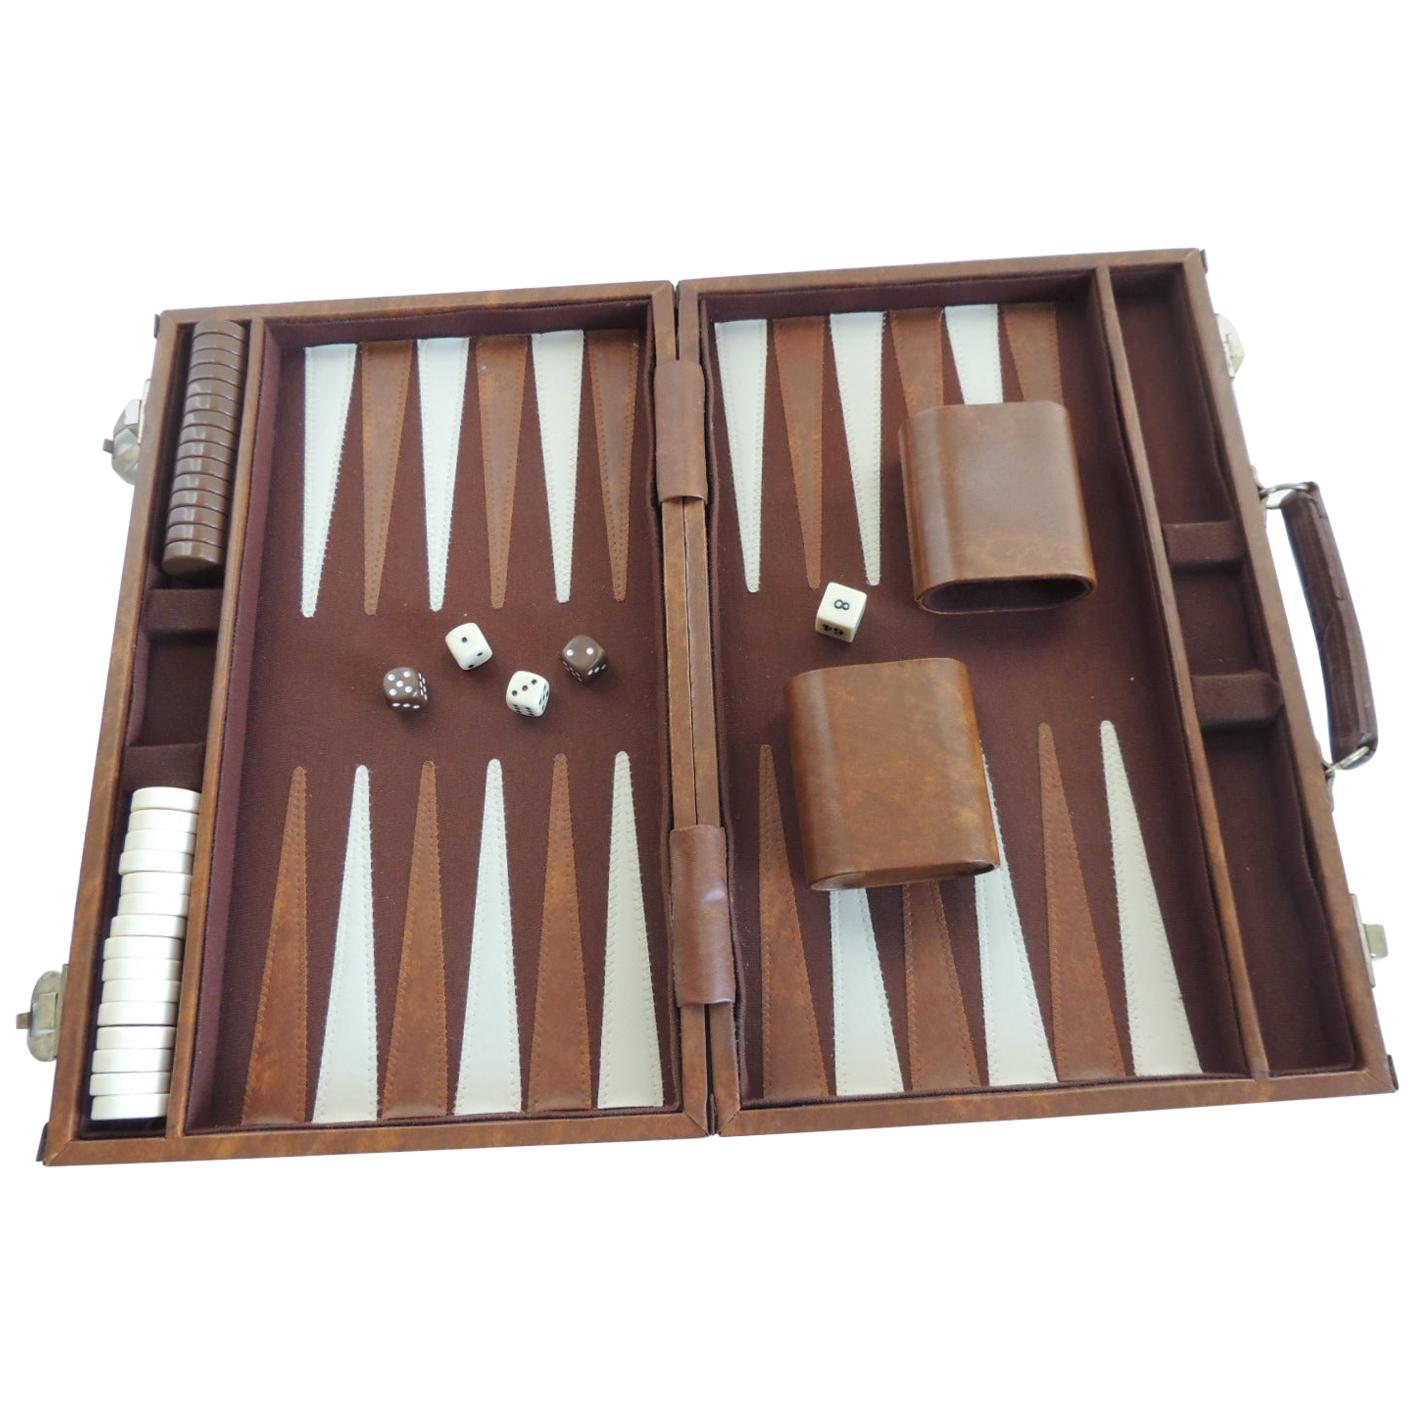 Vintage Brown and Tan Backgammon Game